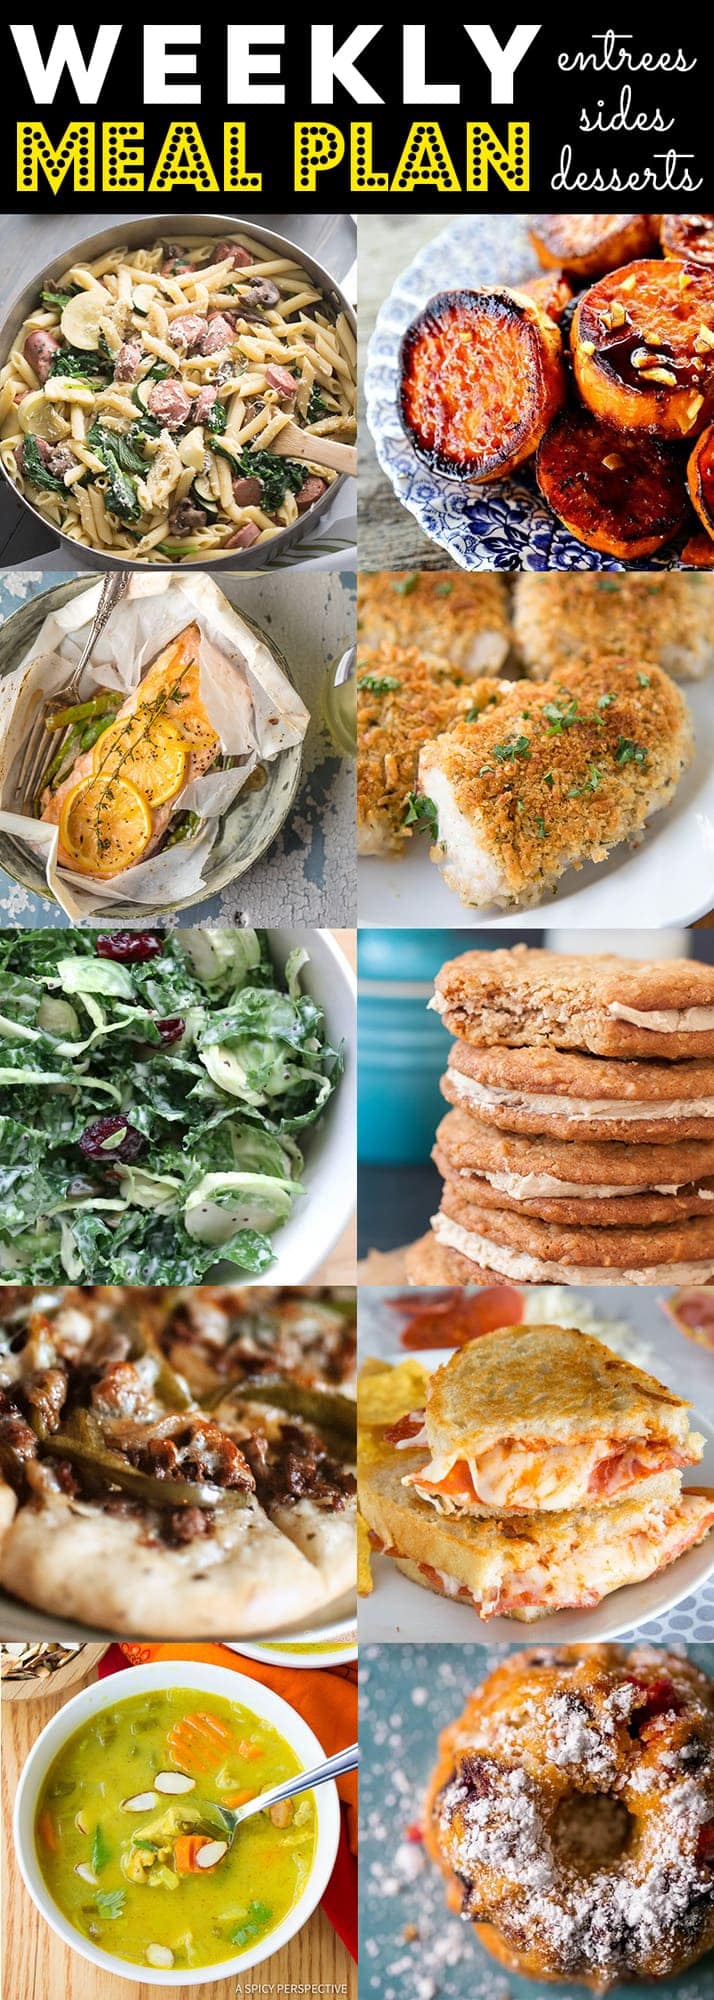 Weekly Meal Plan - 10 Great Recipes to Try This Week!